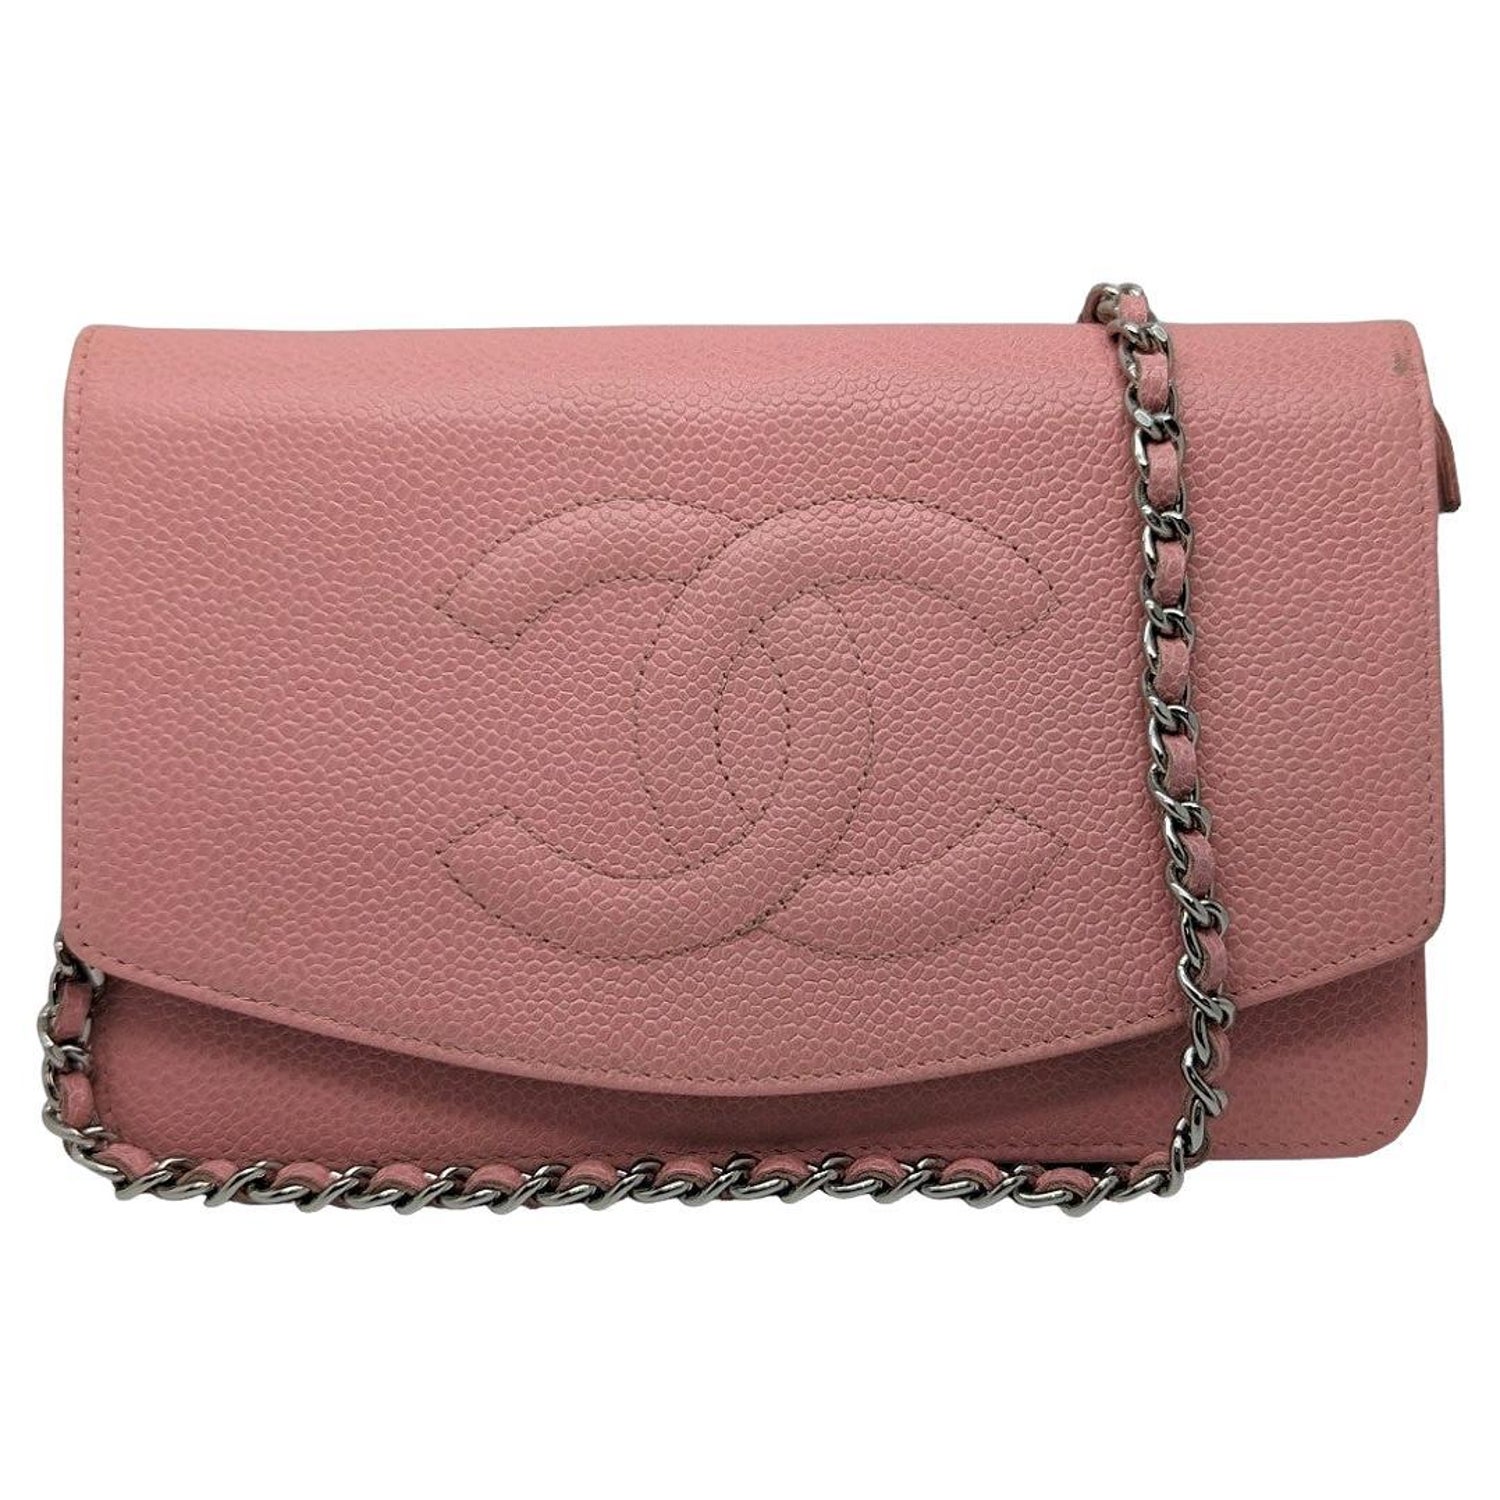 CHANEL Caviar Quilted CC Zip Card Holder Light Pink 732575